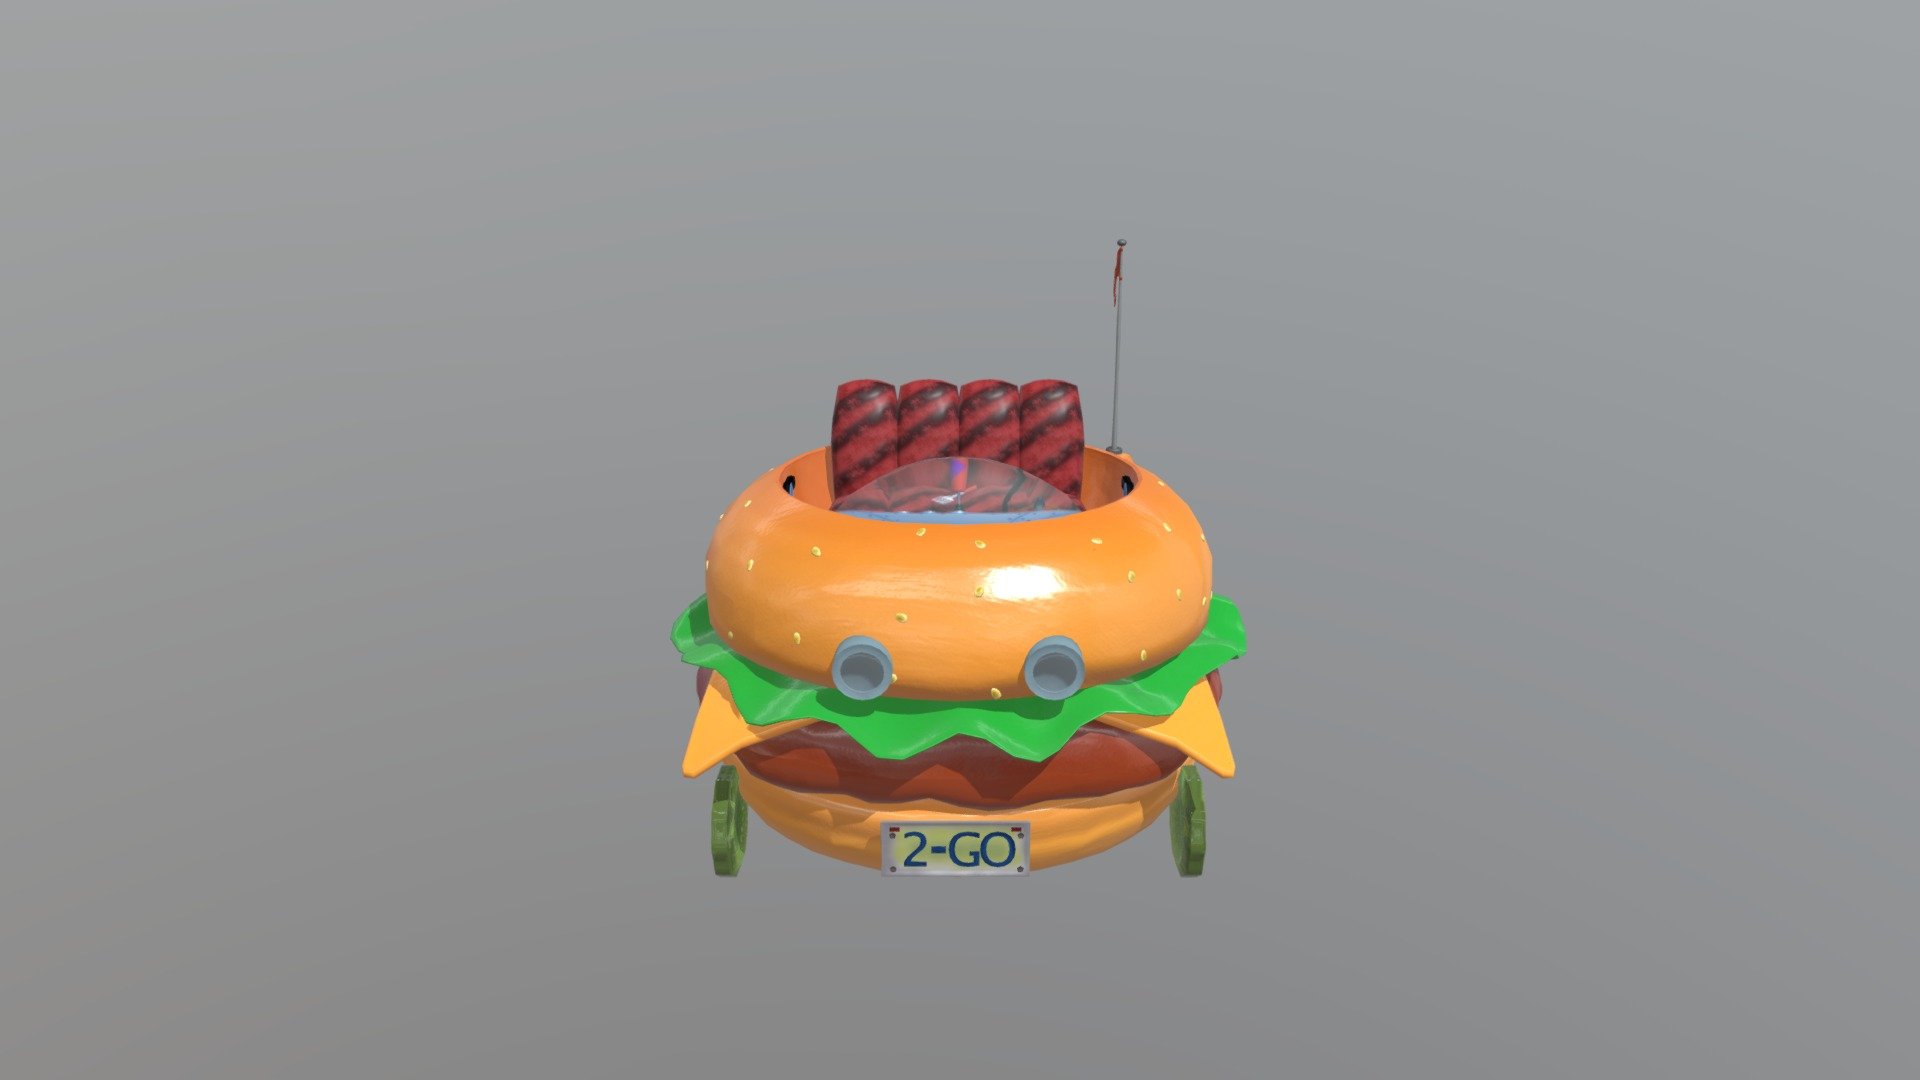 Patty Wagon with all ingredients you already know ;) - Patty Wagon - 3D model by Héctor Flores "Toro" (@mystiquecape) 3d model